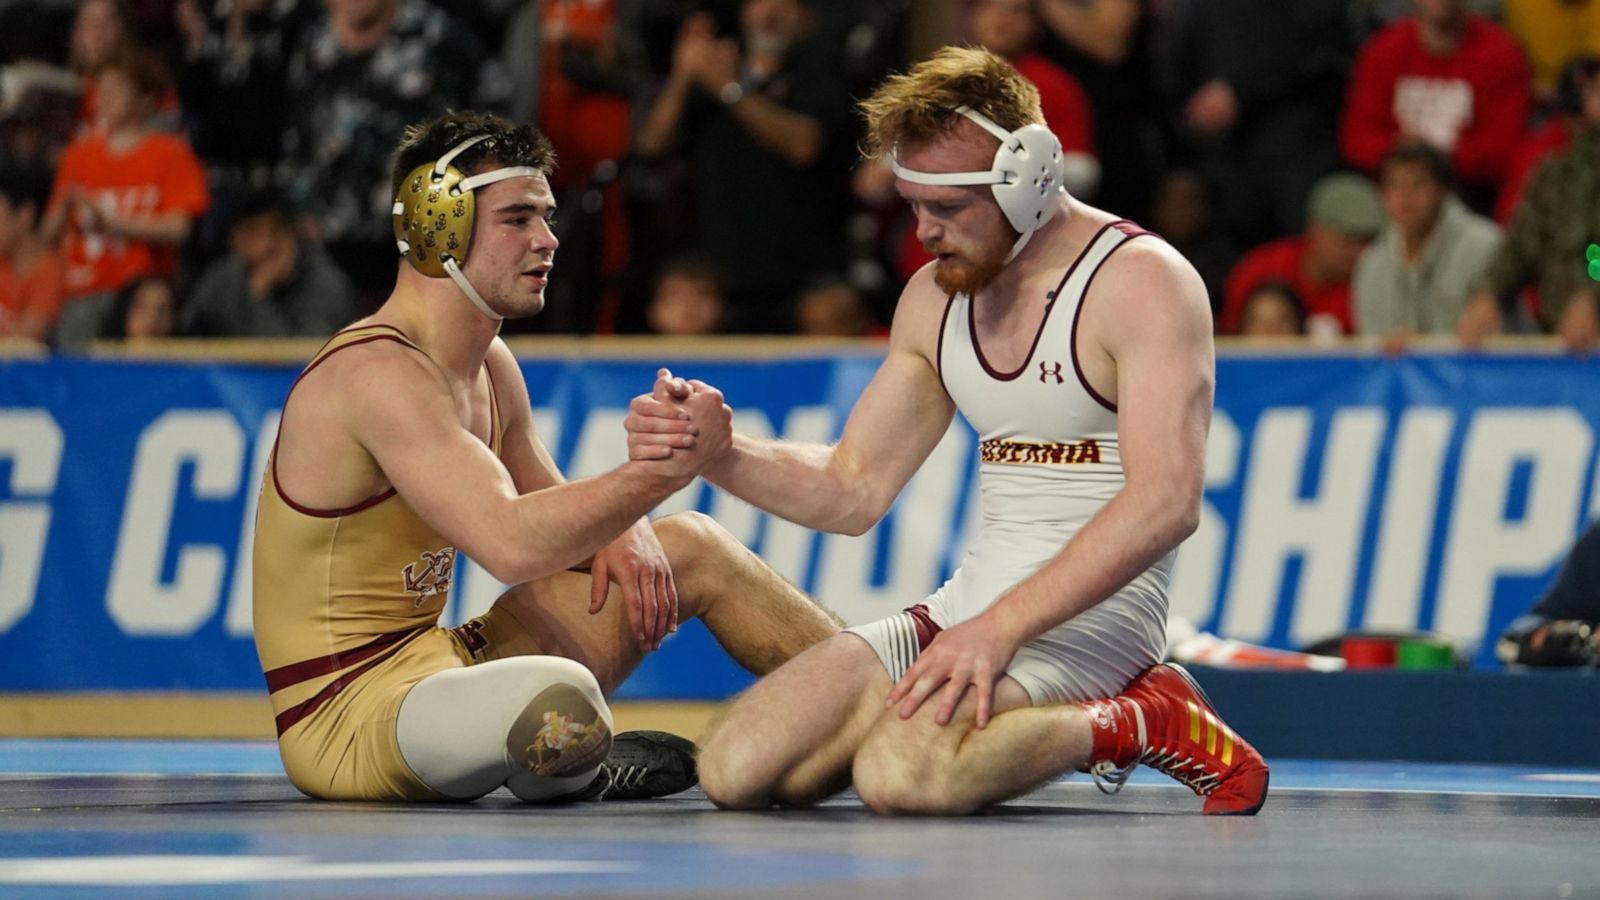 Brothers compete against each other in NCAA wrestling finals Good